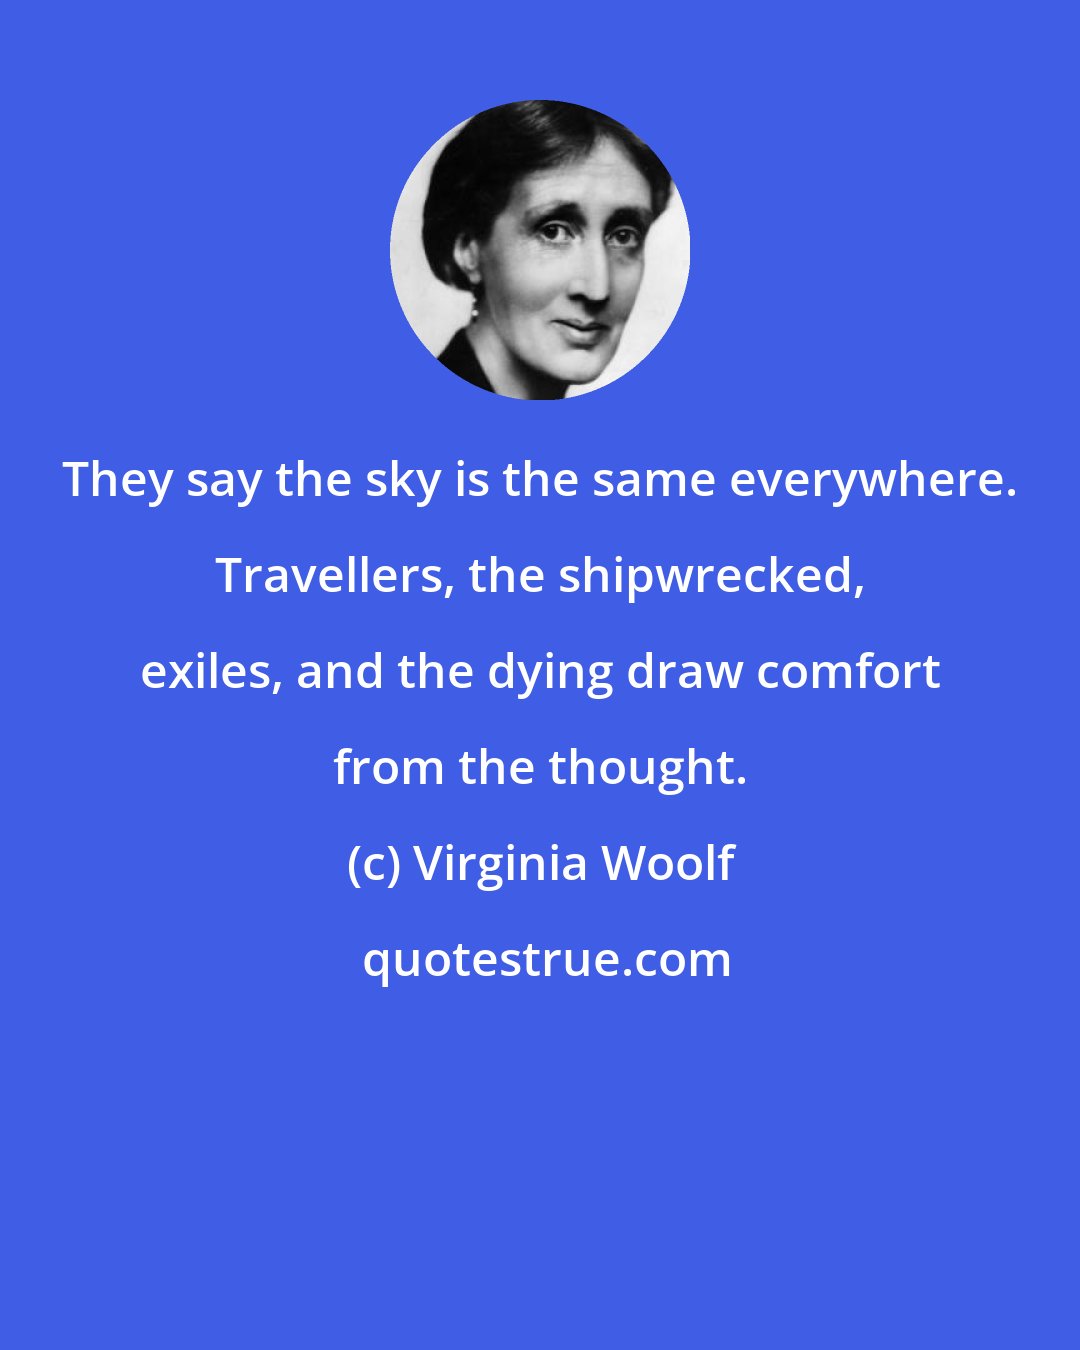 Virginia Woolf: They say the sky is the same everywhere. Travellers, the shipwrecked, exiles, and the dying draw comfort from the thought.